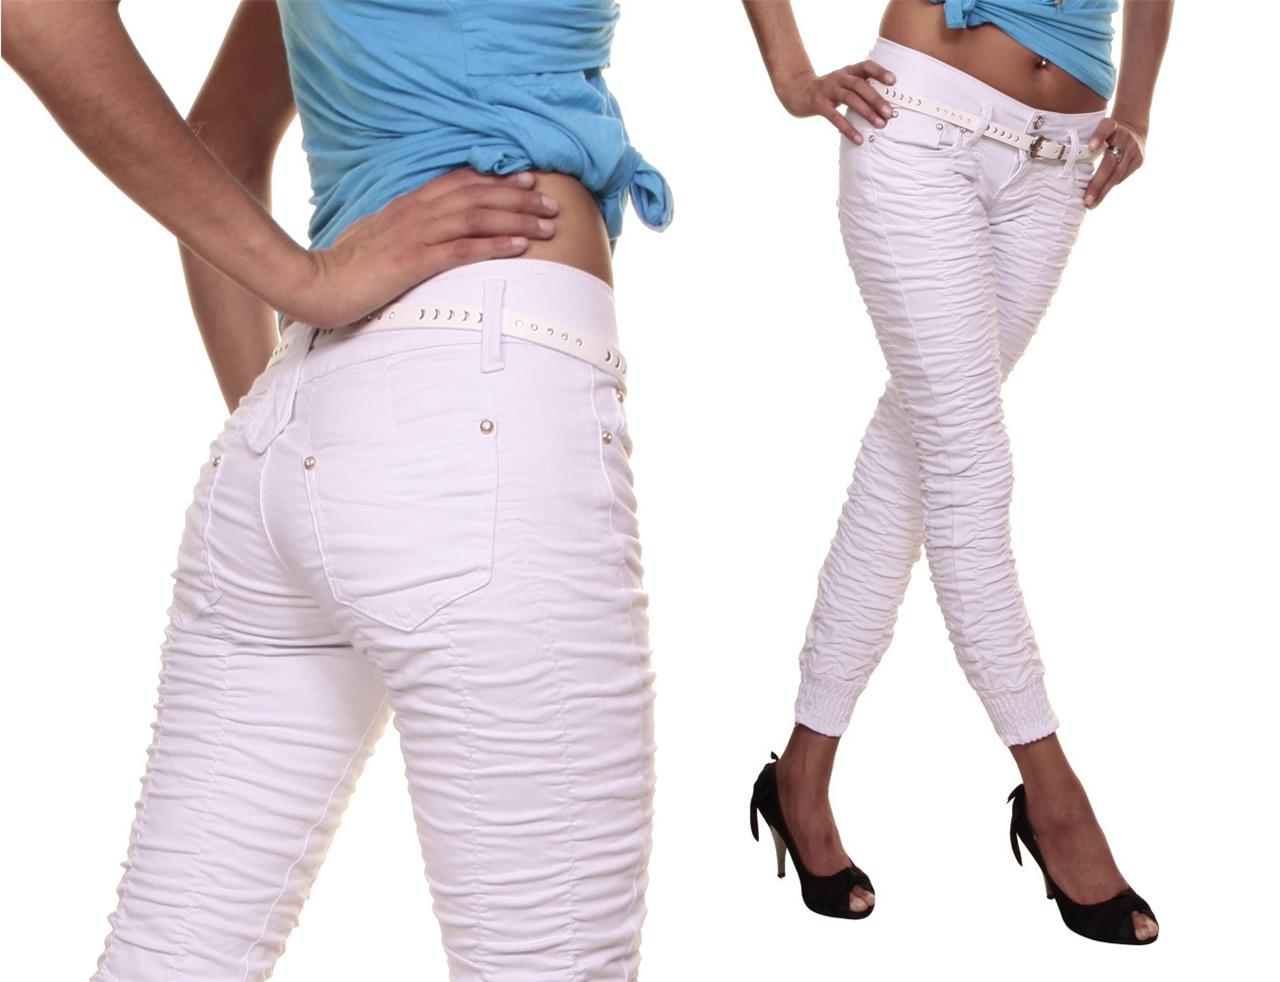 CRAZY AGE RUFFLED SKINNY JEANS+BELT IN UK SIZE 6 8 10 12 14 ,WHITE